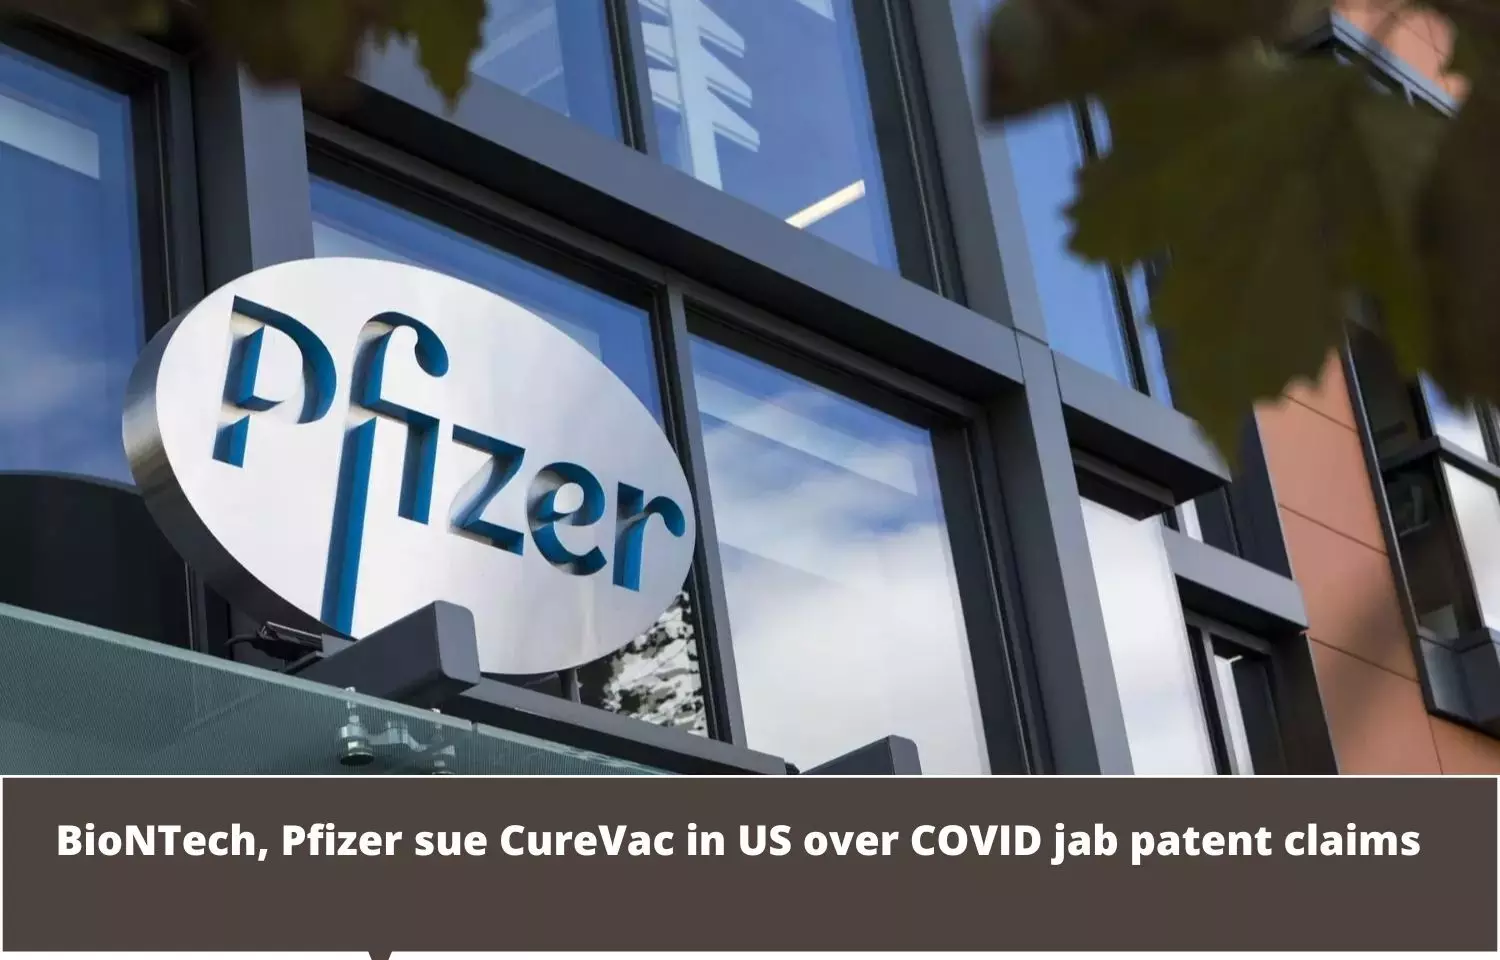 BioNTech, Pfizer sue CureVac in US over COVID jab patent claims